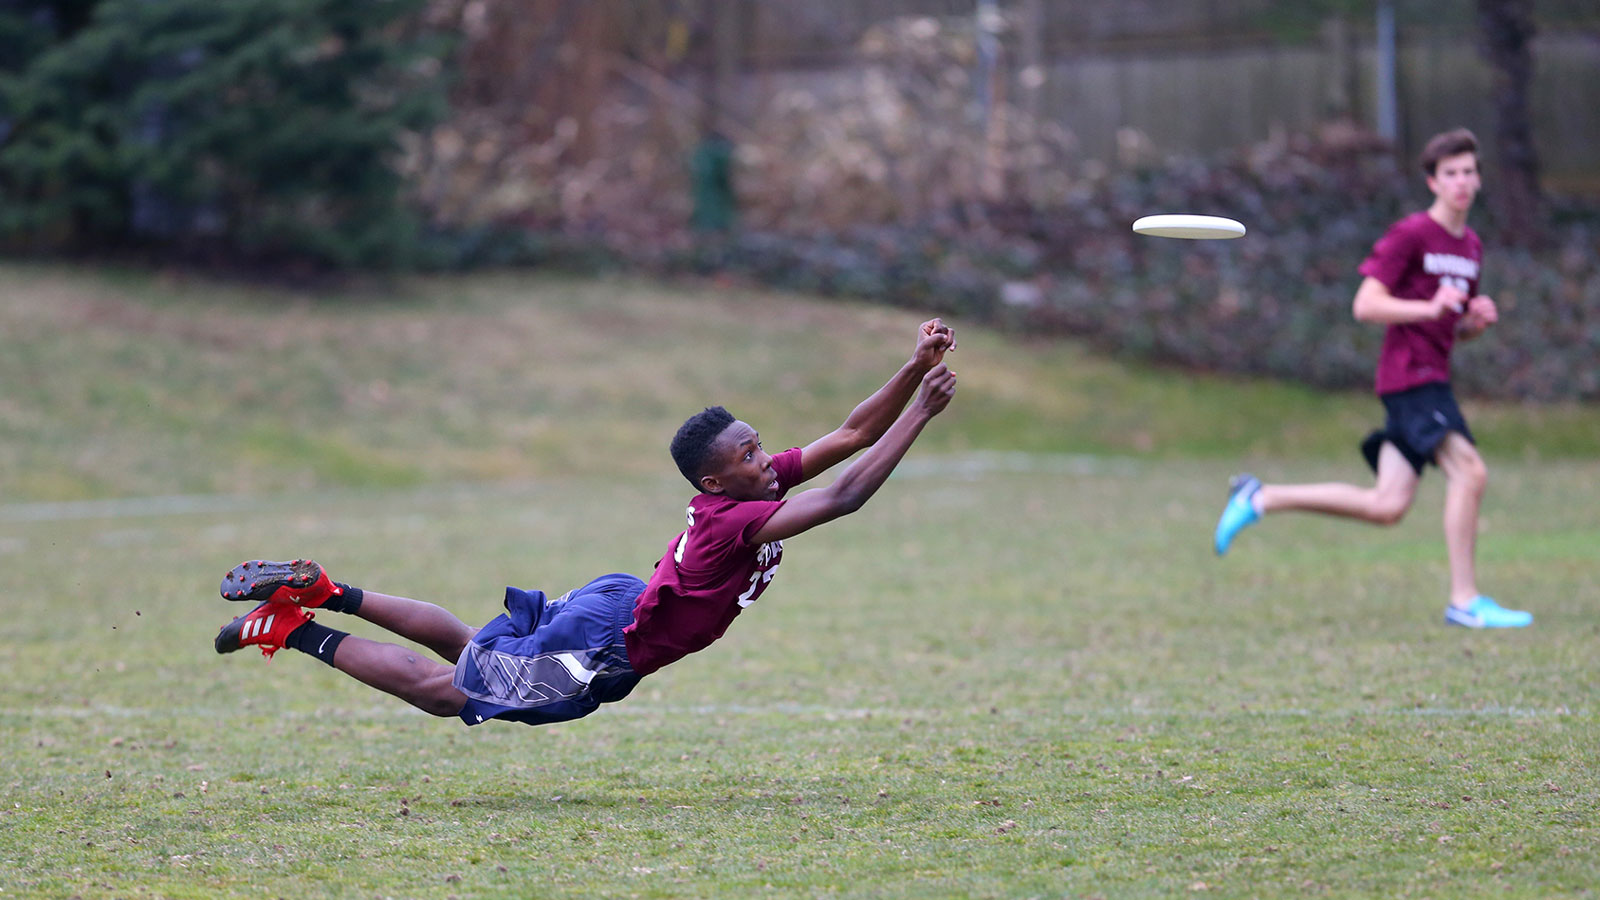 Player leaps for the Frisbee in an Ultimate Frisbee game.